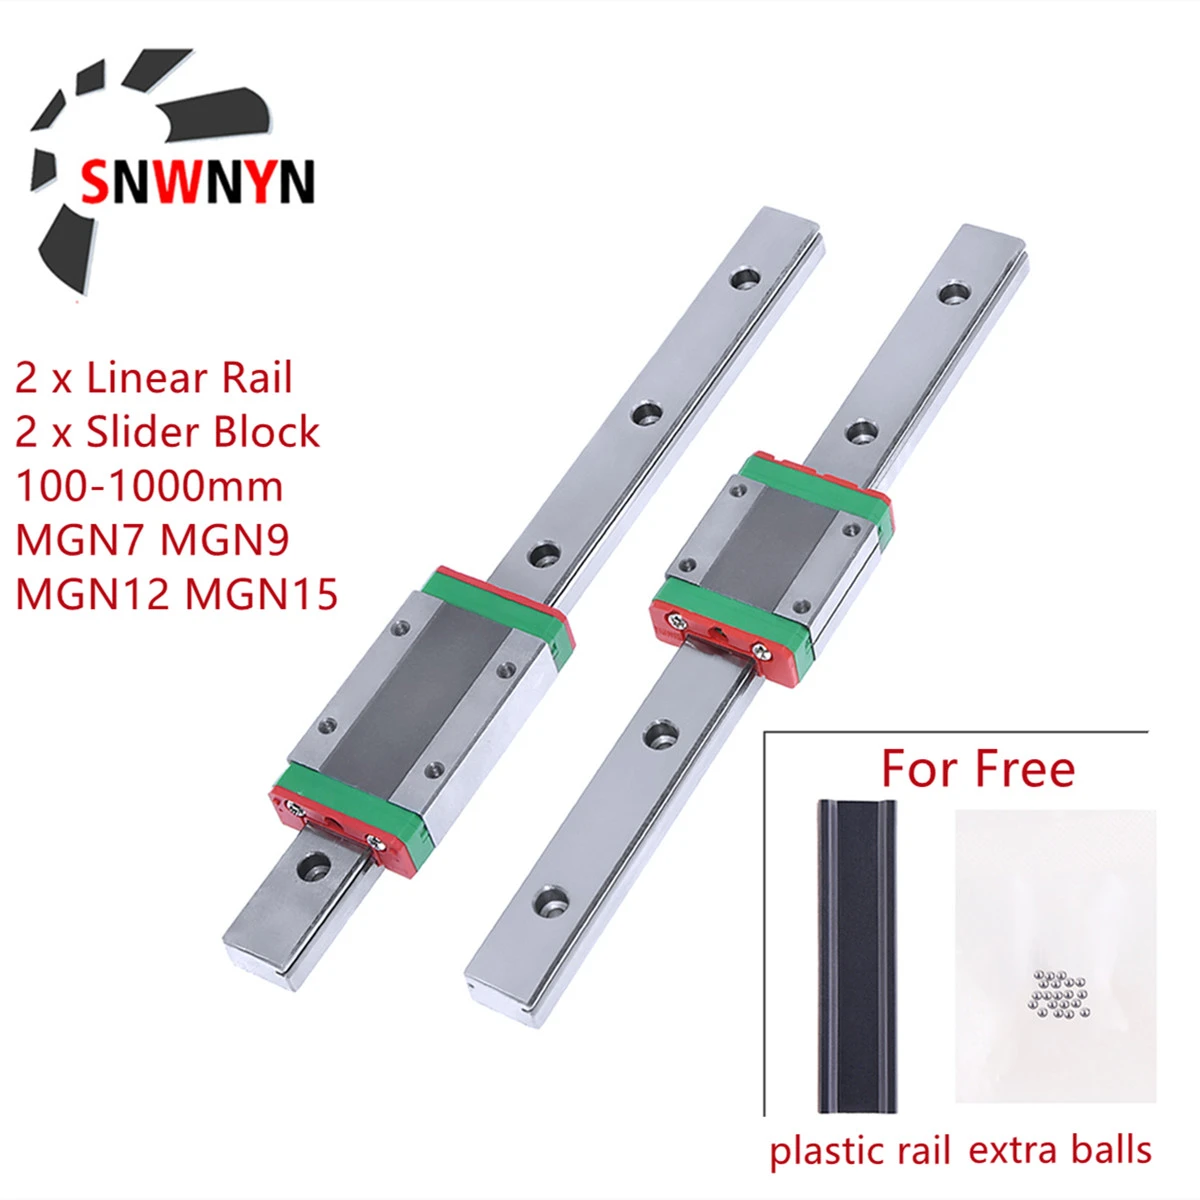 Huh-DAOGUI Color : MGN12C, Size : 900mm 1pc MGN9H Or MGN9C Carriage 3D Printer CNC 1set MGN7 MGN9 MGN12 MGN15 100-1000mm Miniature Linear Rail Slide 1pc MGN Linear Guide 